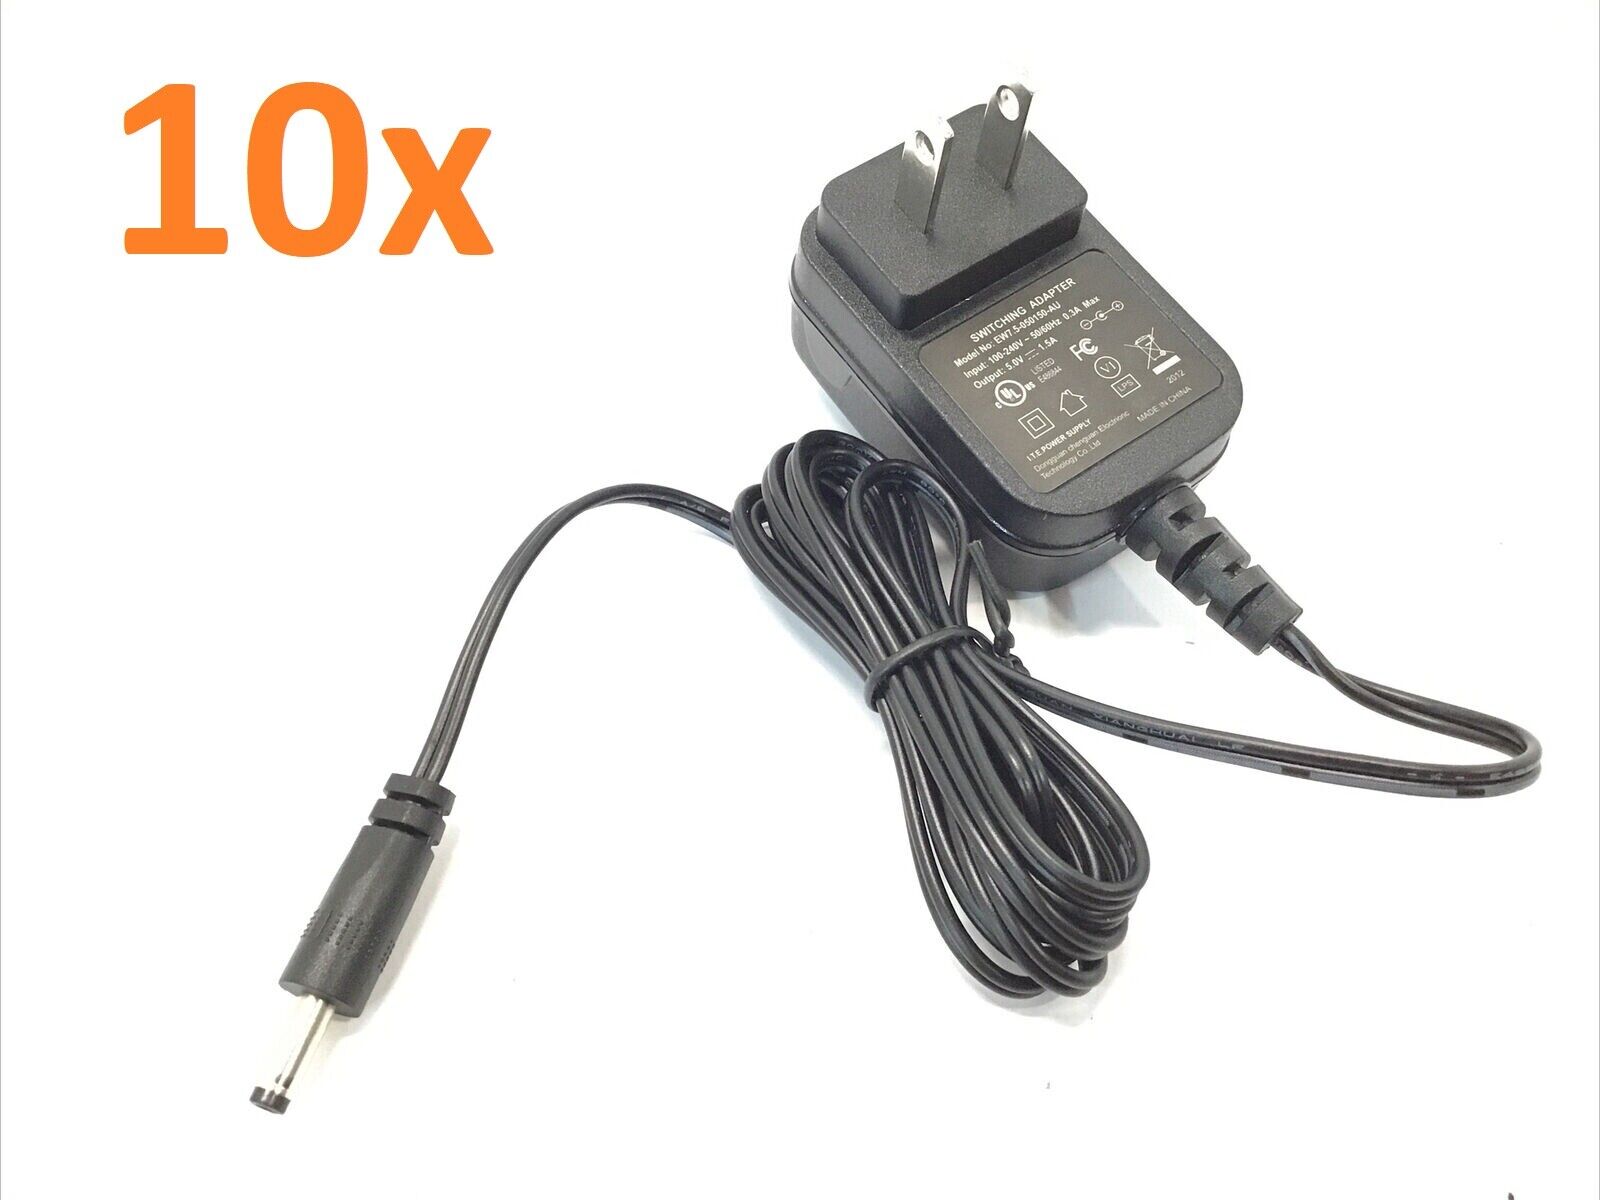 Lot of 10 - 5V 1.5A Switching AC Adapter EW7.5-050100-AU Power Supply Charger